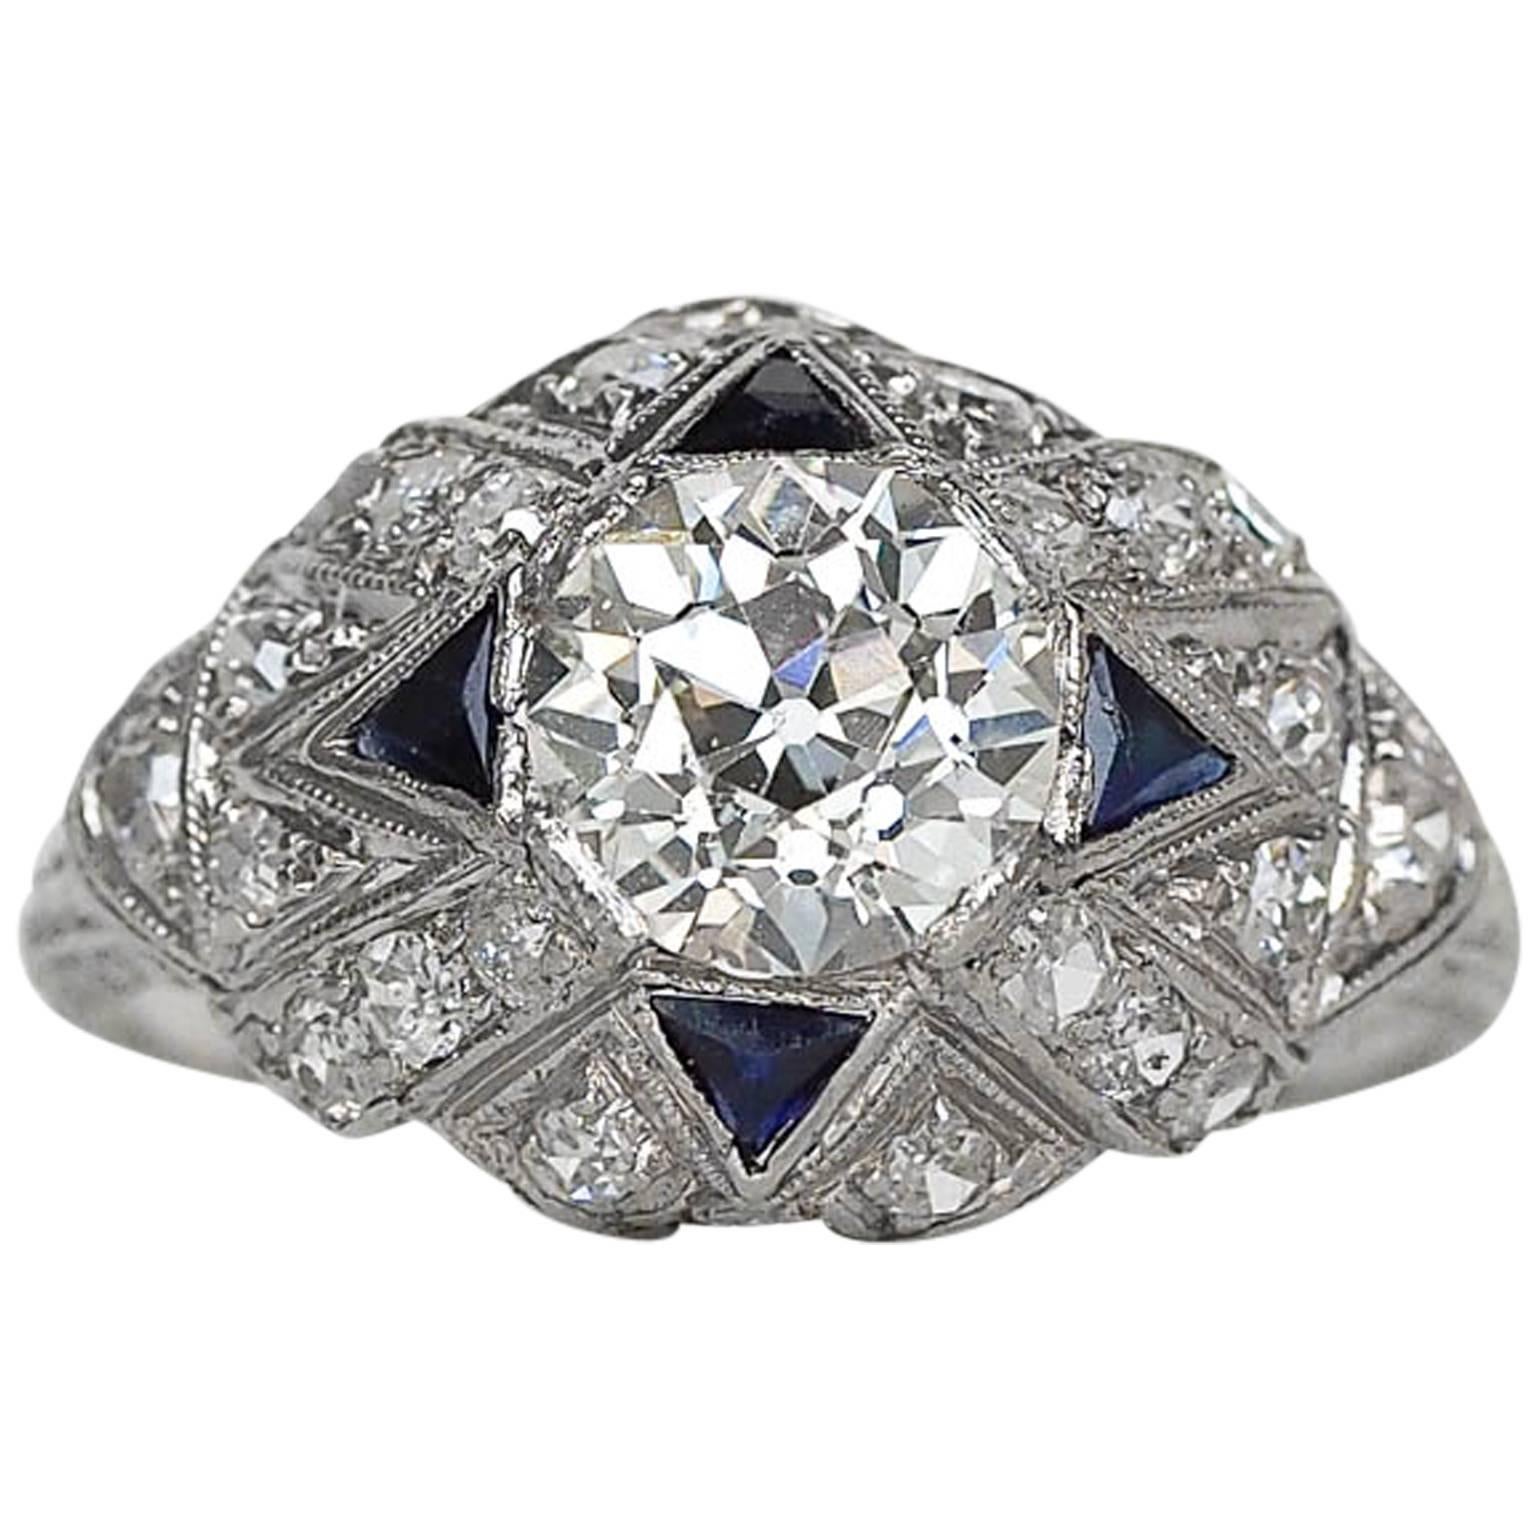 1930s Art Deco 1.28 Carat GIA Certified Old European Diamond Engagement Ring For Sale